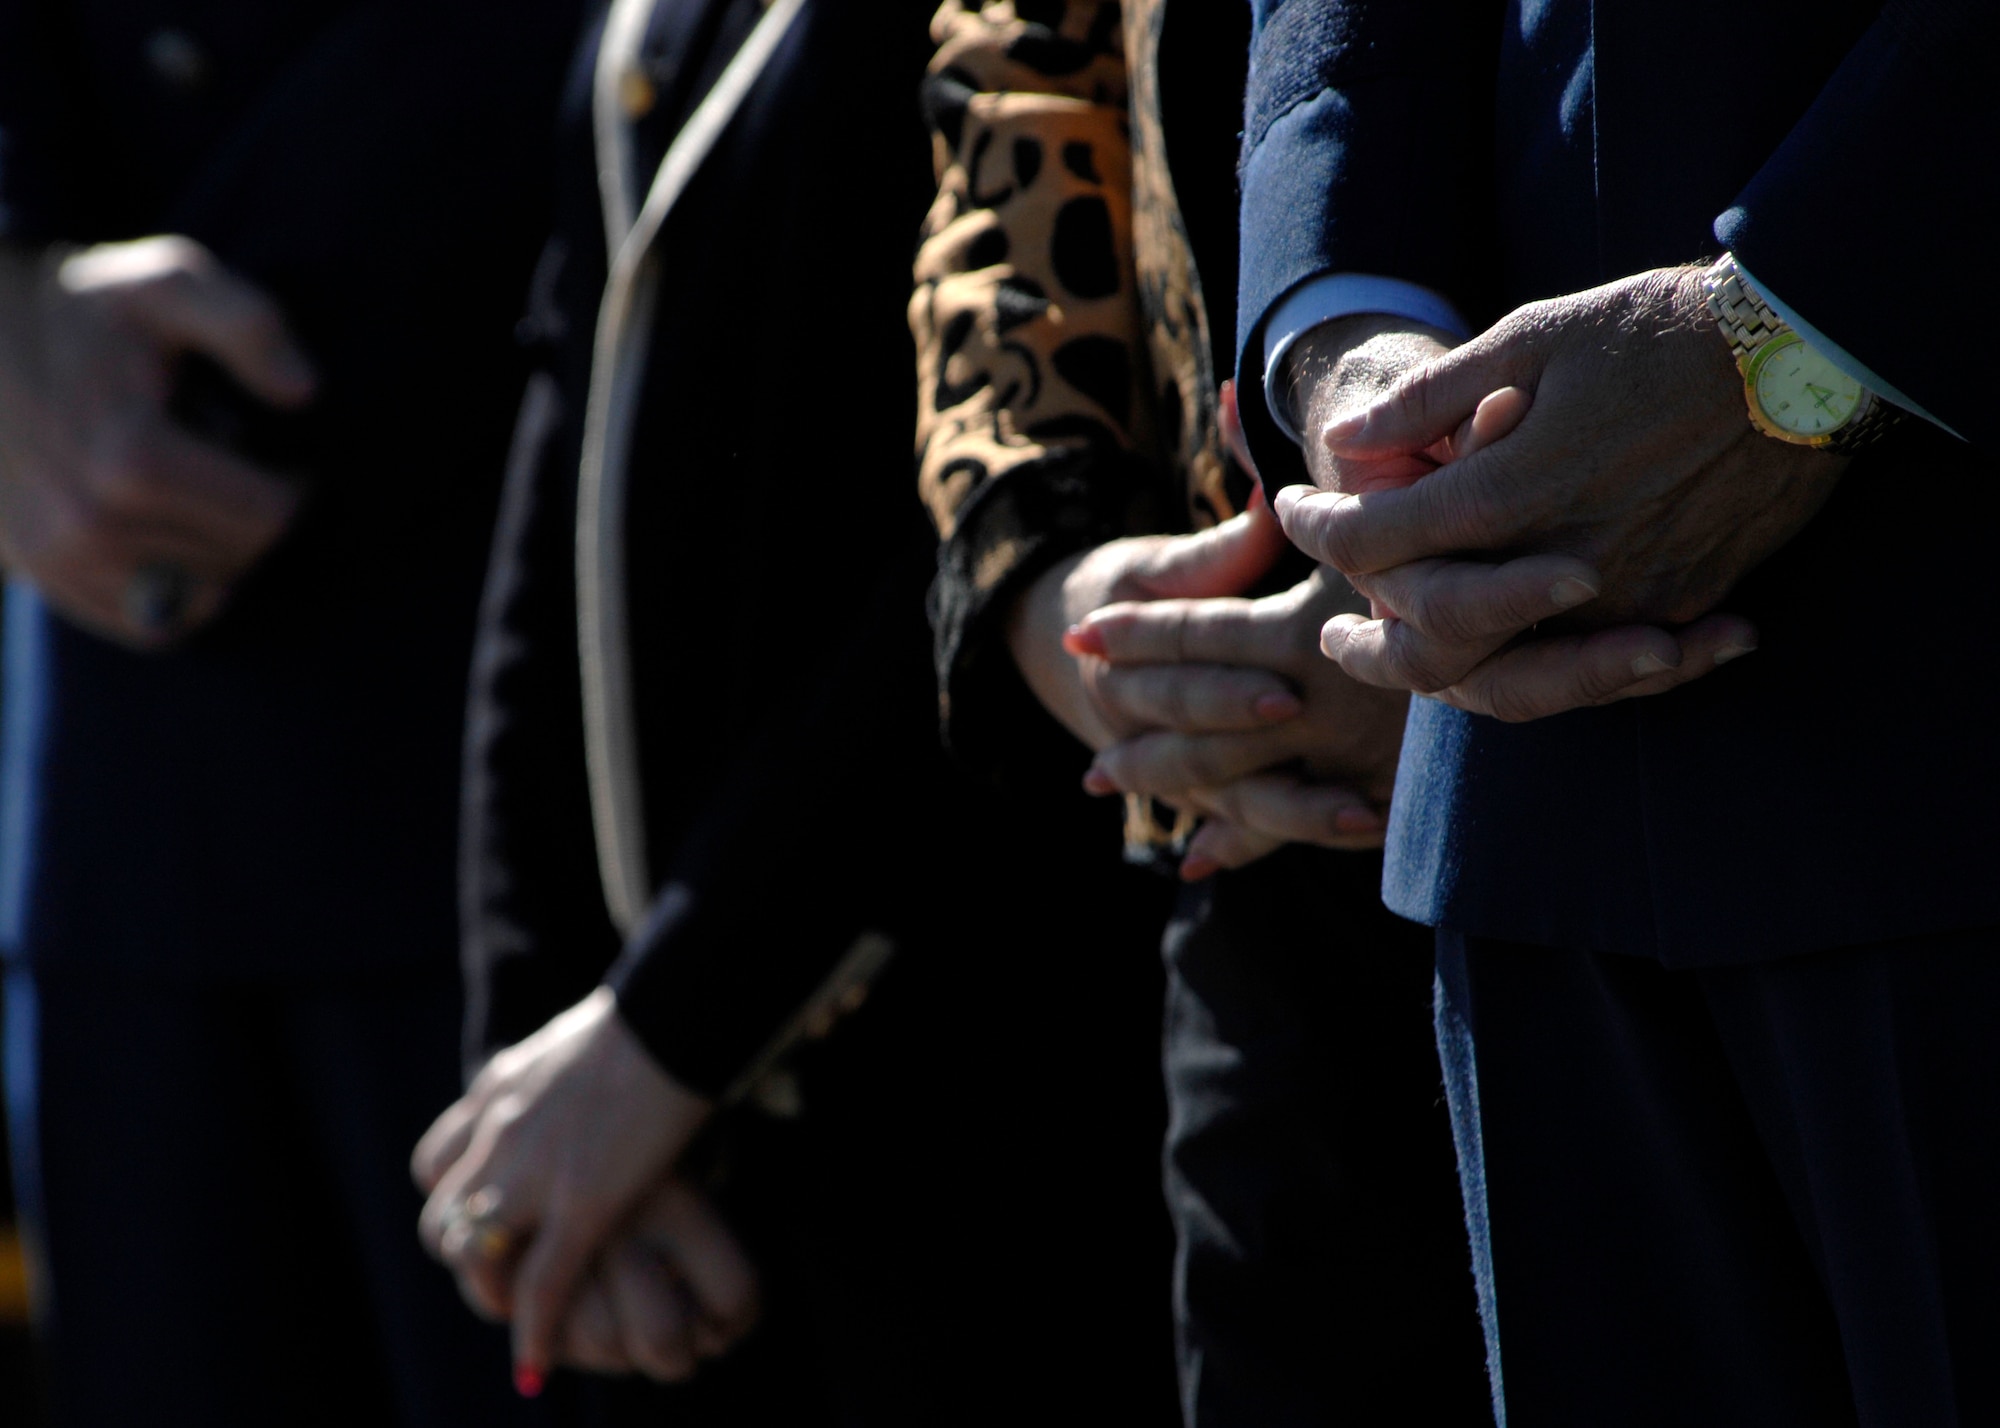 Heads are bowed and hands are crossed during the opening prayer of the Wreath Ceremony held at the base of the new Air Force Memorial in Arlington, Va., Oct. 15, 2006. Secretary of the Air Force Michael W. Wynne officially closed the Air Force Memorial commemoration by leading the wreath laying ceremony.  On behalf of all American citizens President George W. Bush accepted the Air Force Memorial from Air Force Memorial Foundation Chairman Ross Perot Jr. during the previous day's dedication ceremony at the base of the Air Force Memorial that overlooks the Pentagon.  Designed by the late James Ingo Freed the memorial with its three soaring spires inspired by the U.S. Air Force Thunderbirds bomb burst manuever, pays tribute to and honors the patriotic men and women of the U.S. Air Force and its predeccessor organizations. An open house was held near the Pentagon in conjunction with the dedication ceremony which featured performances by the U.S. Air Force Band, the U.S. Air Force Honor Guard drill team, and culminated with a concert featuring country music performer LeeAnn Womack. (U.S. Air Force photo/Tech. Sgt. Cohen Young)